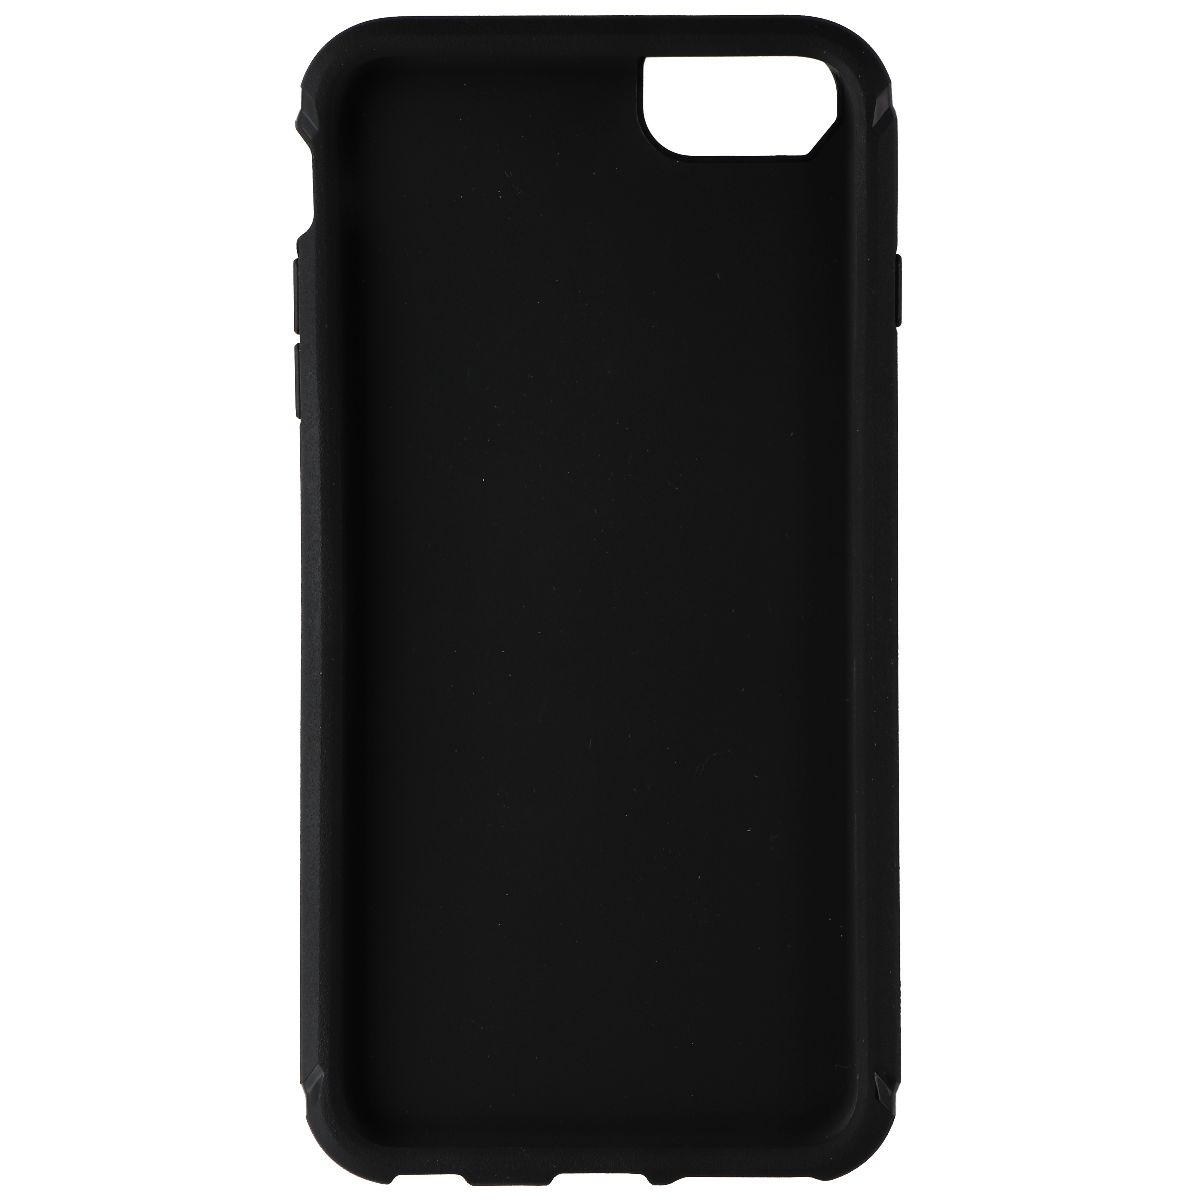 Tech21 Classic Tactical Series Case For Apple IPhone 6 Plus - Black (Refurbished)